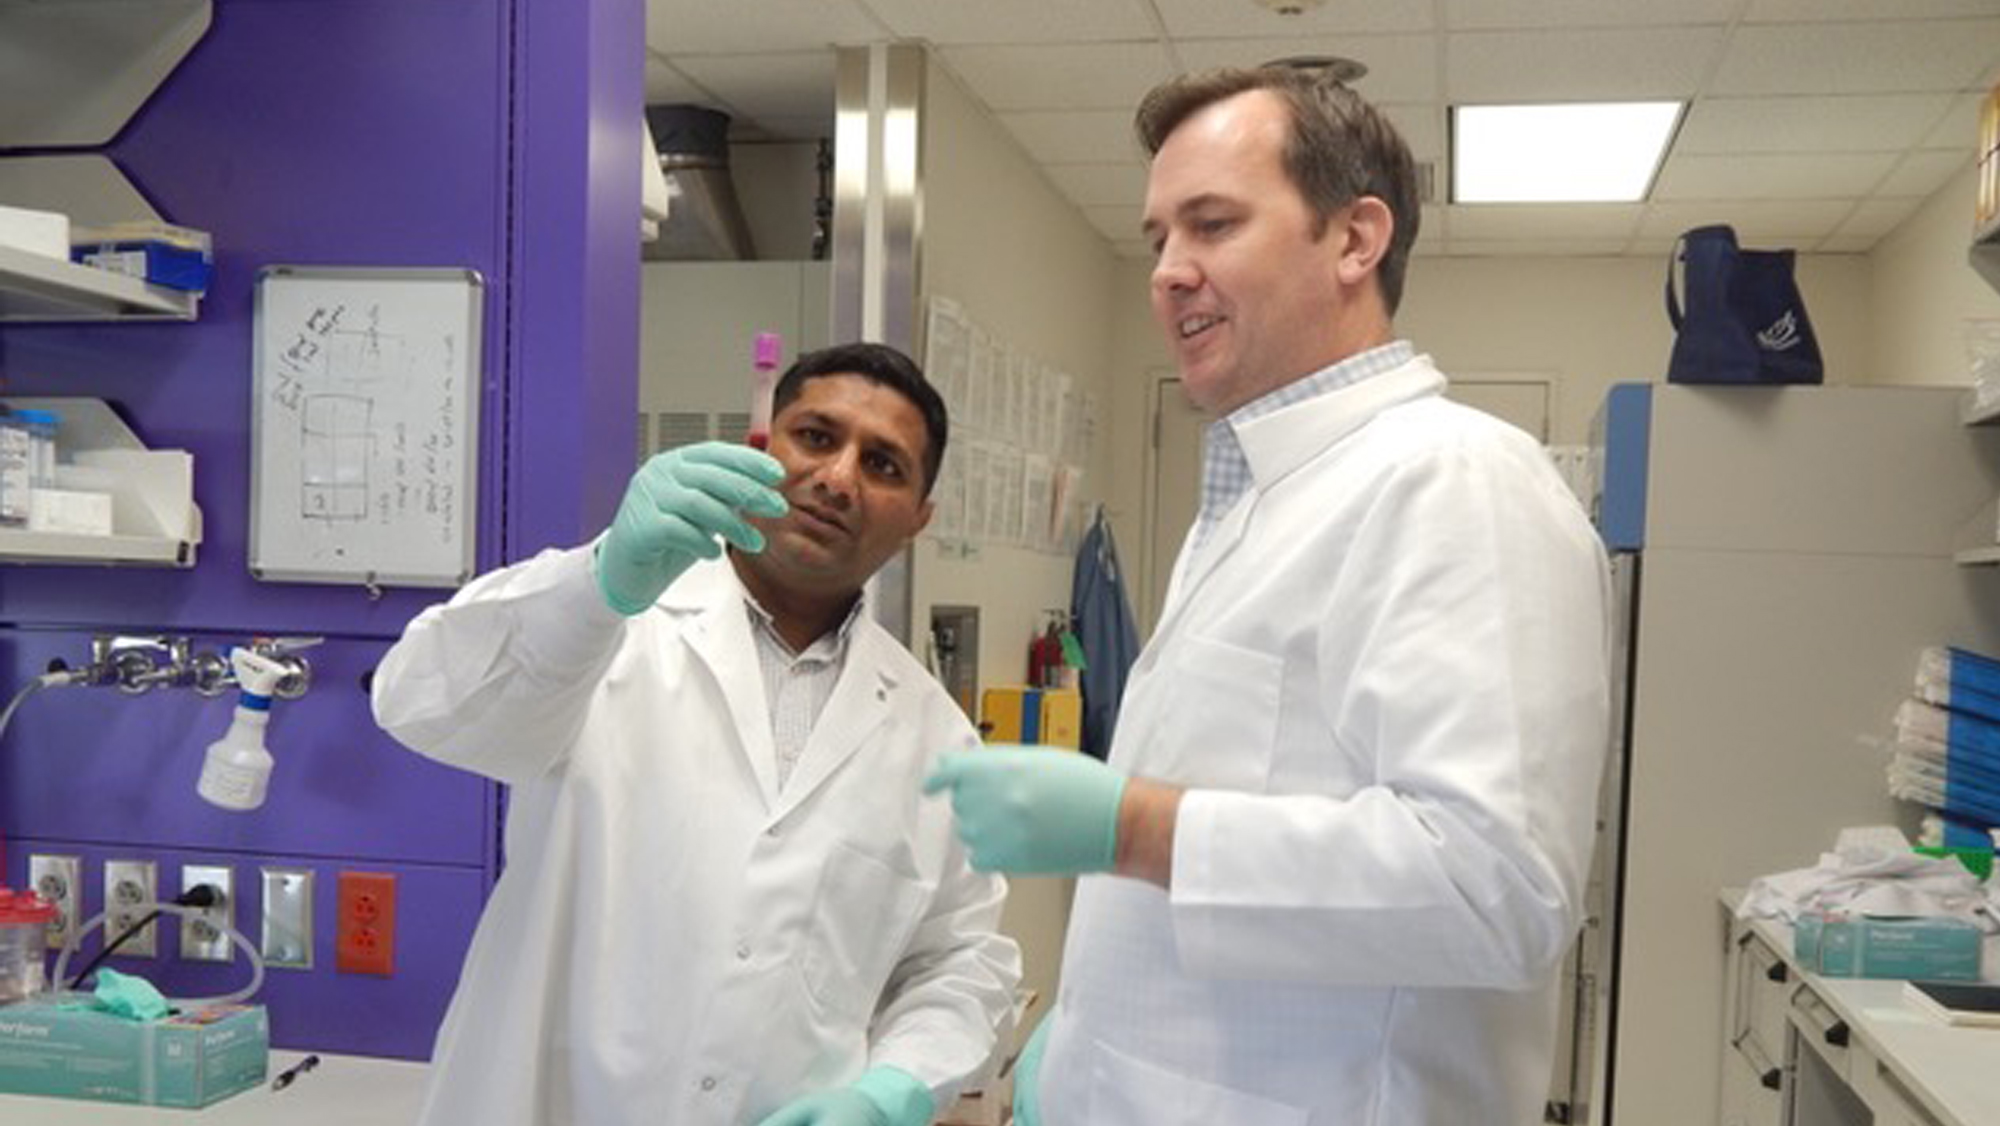 Dr. Abhishek Jain from Texas A&M University and Dr. Jonathan Flanagan from Texas Children’s Hospital and Baylor College of Medicine collaborate in the lab in Houston.